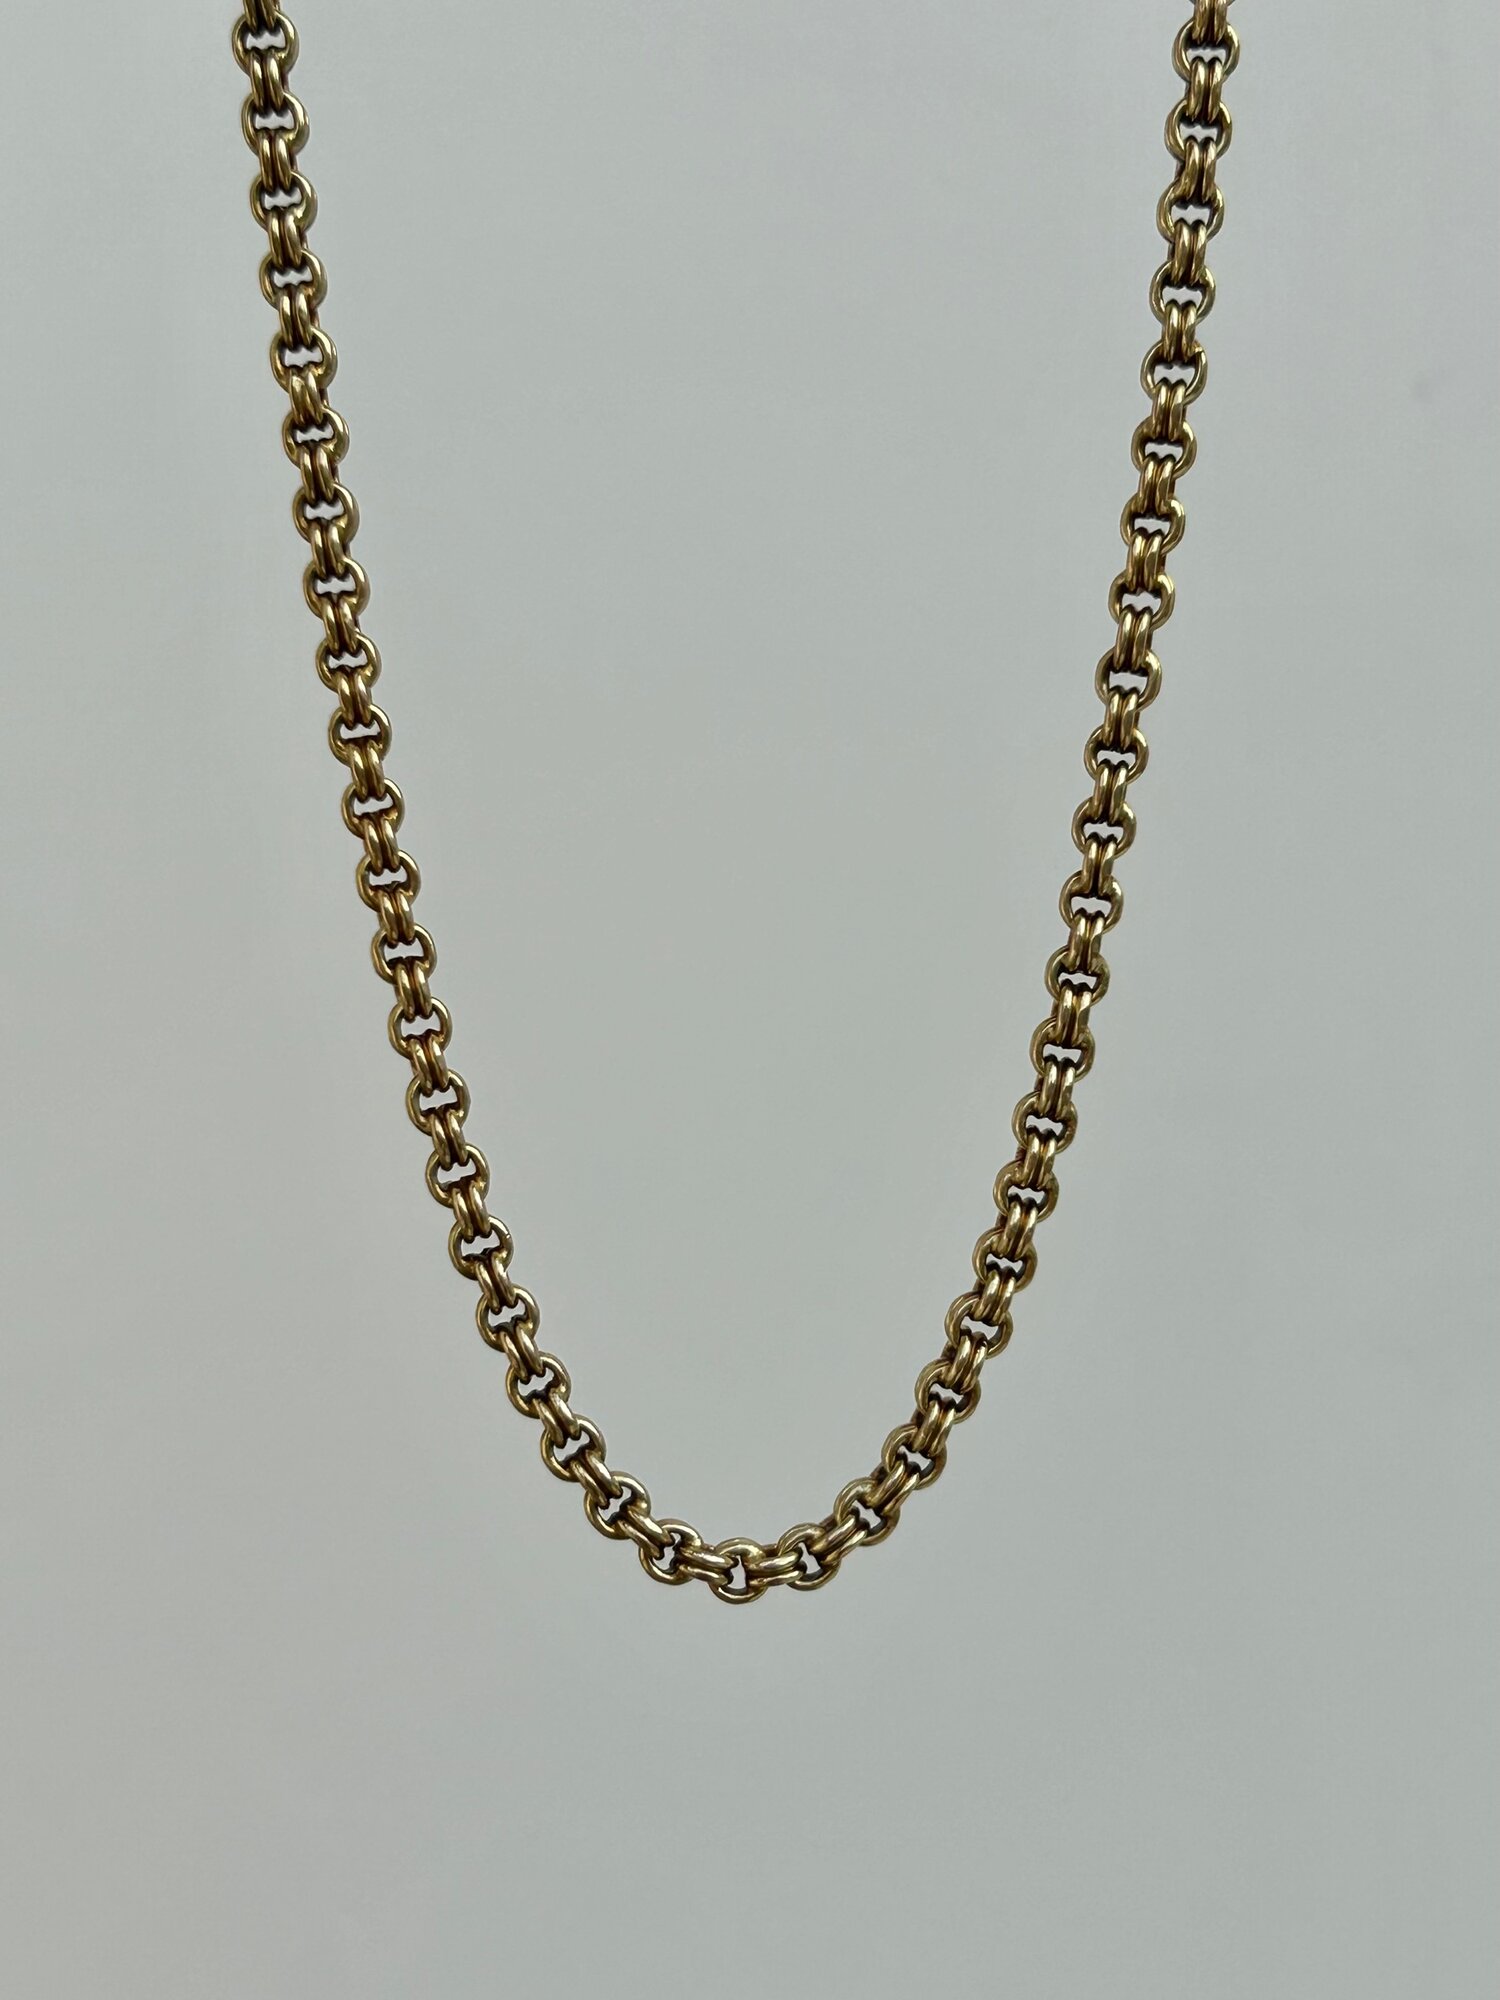 Antique Chunky 15ct Yellow Gold Rope Chain with Barrel Clasp — Gembank1973